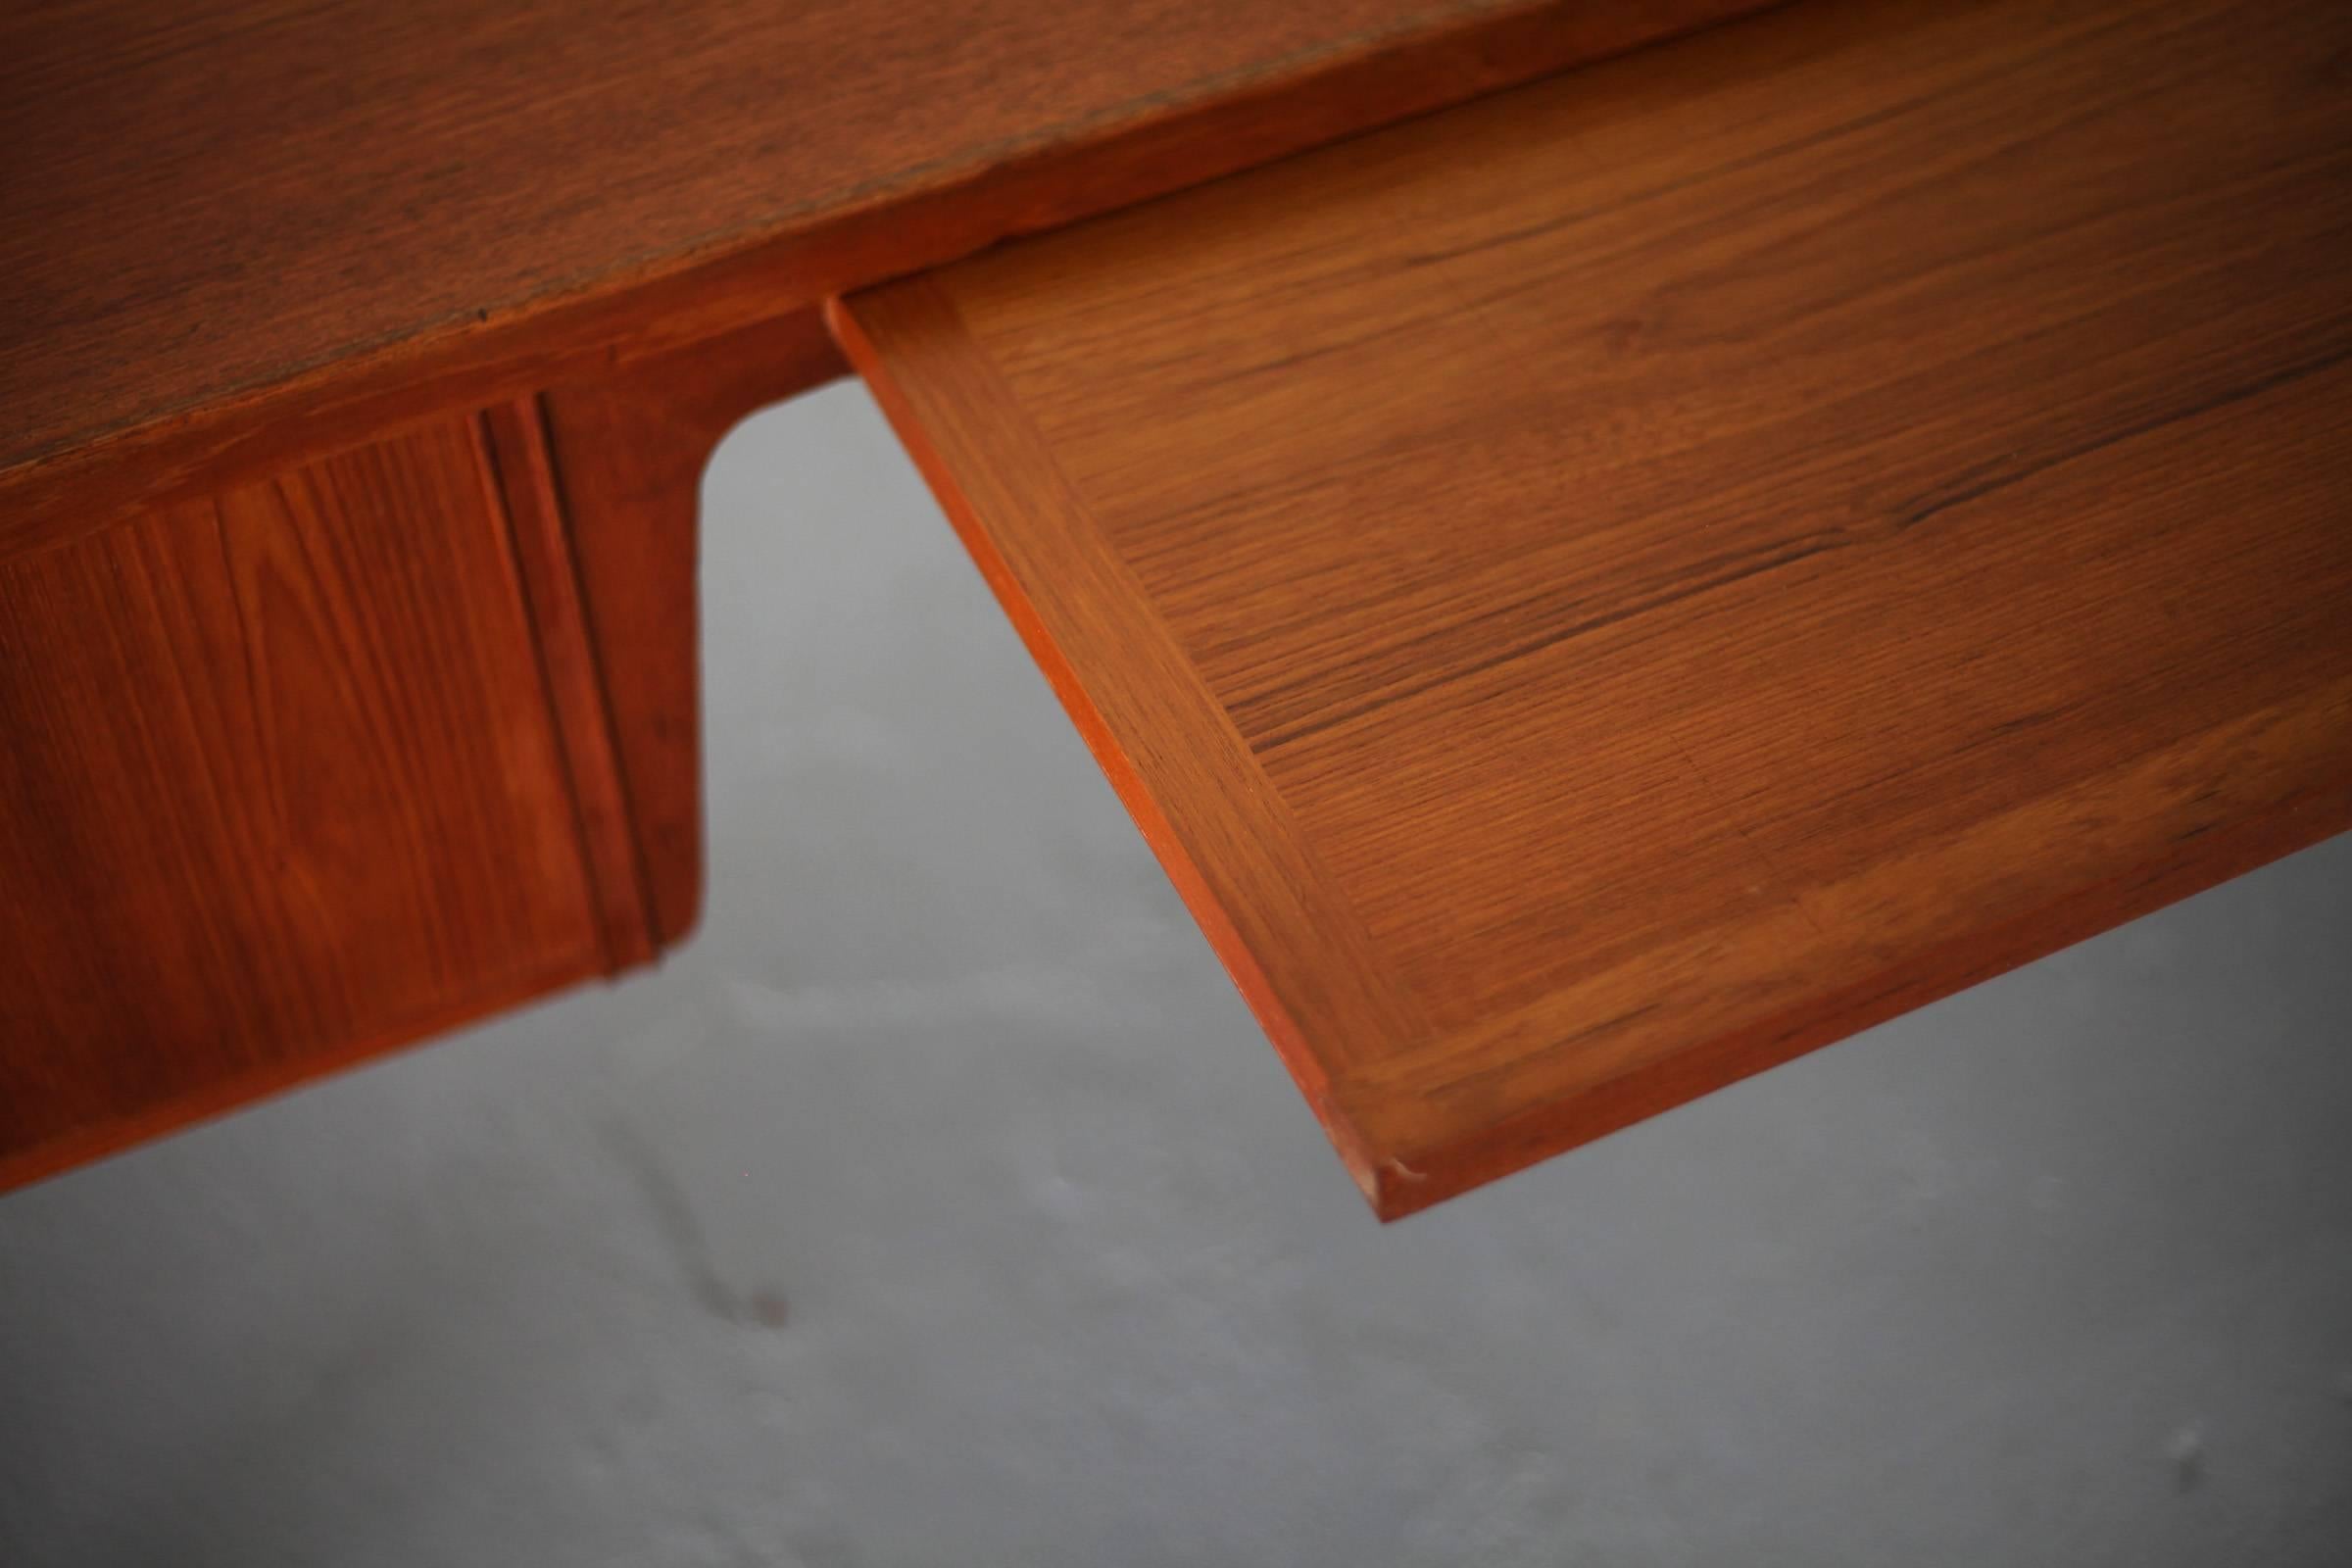 Beautifully executed Danish Modern Teak Desk from the 1950s 3